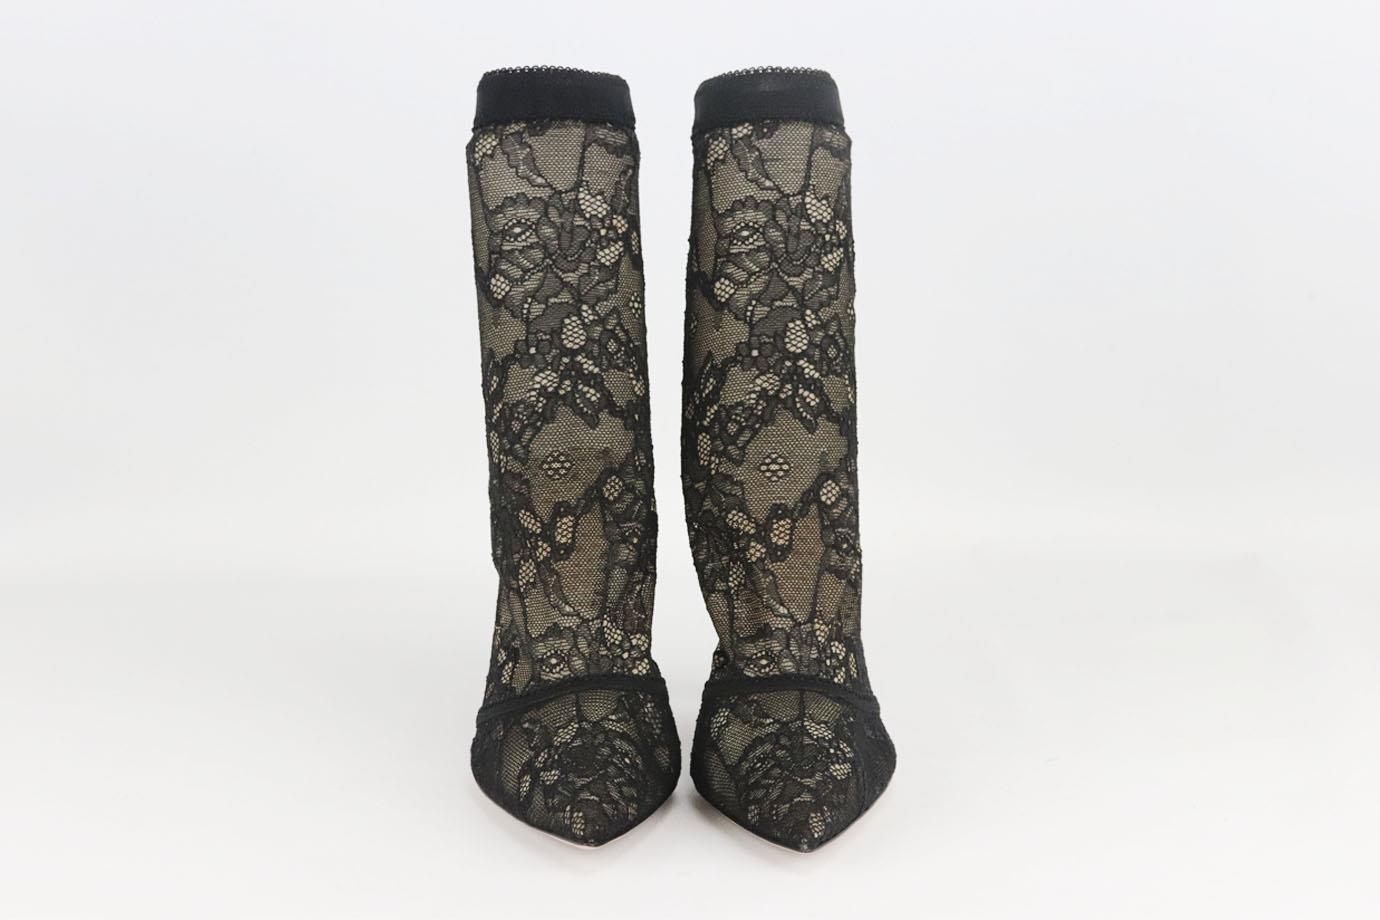 Gianvito Rossi stretch lace and suede ankle boots. Black. Pull on. Does not come with dustbag or box. Size: EU 38 (UK 5, US 8). Shaft: 6 in. Outersole: 9.6 in. Heel: 3.5 in 
